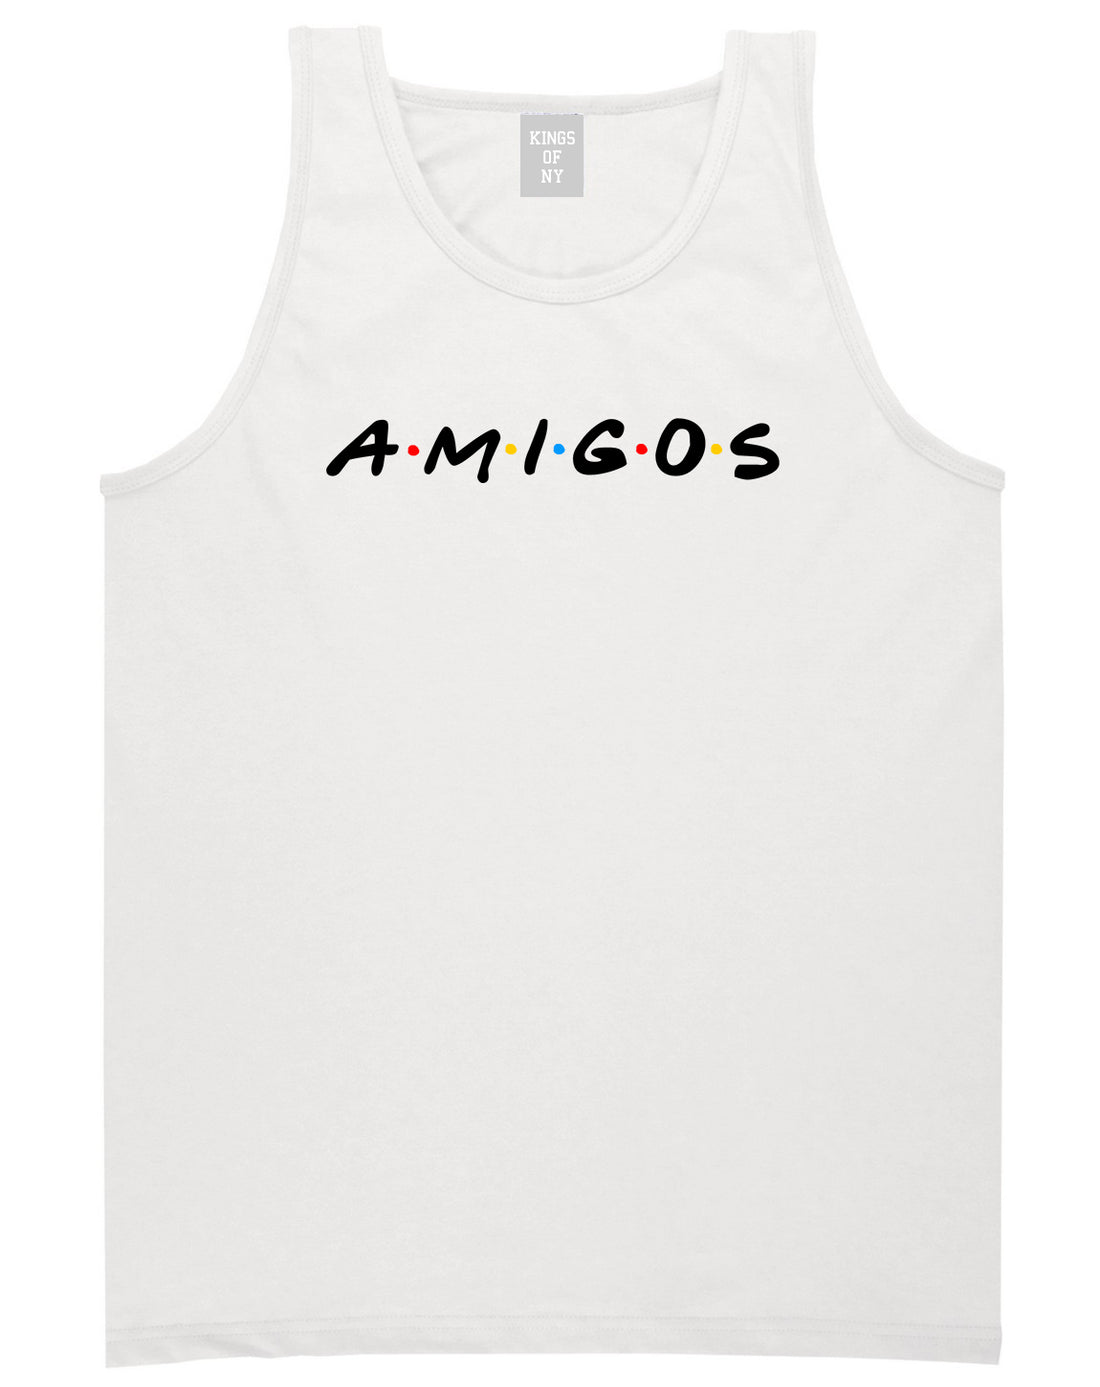 Amigos Funny Friends Spanish Mens Tank Top T-Shirt White